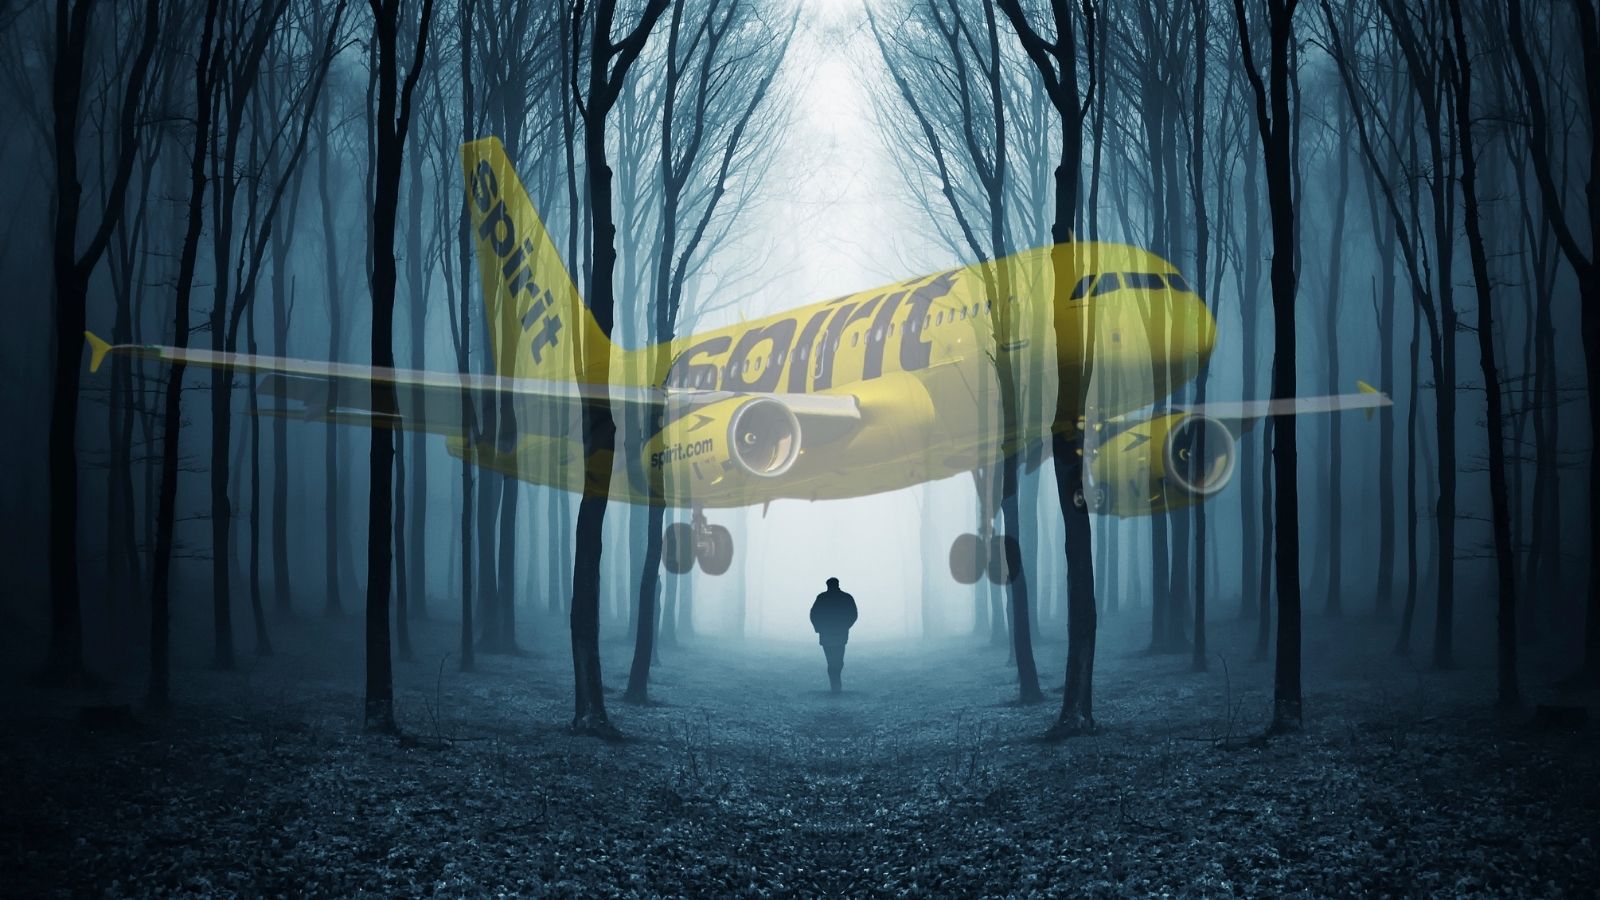 a man walking in a forest with a plane flying above